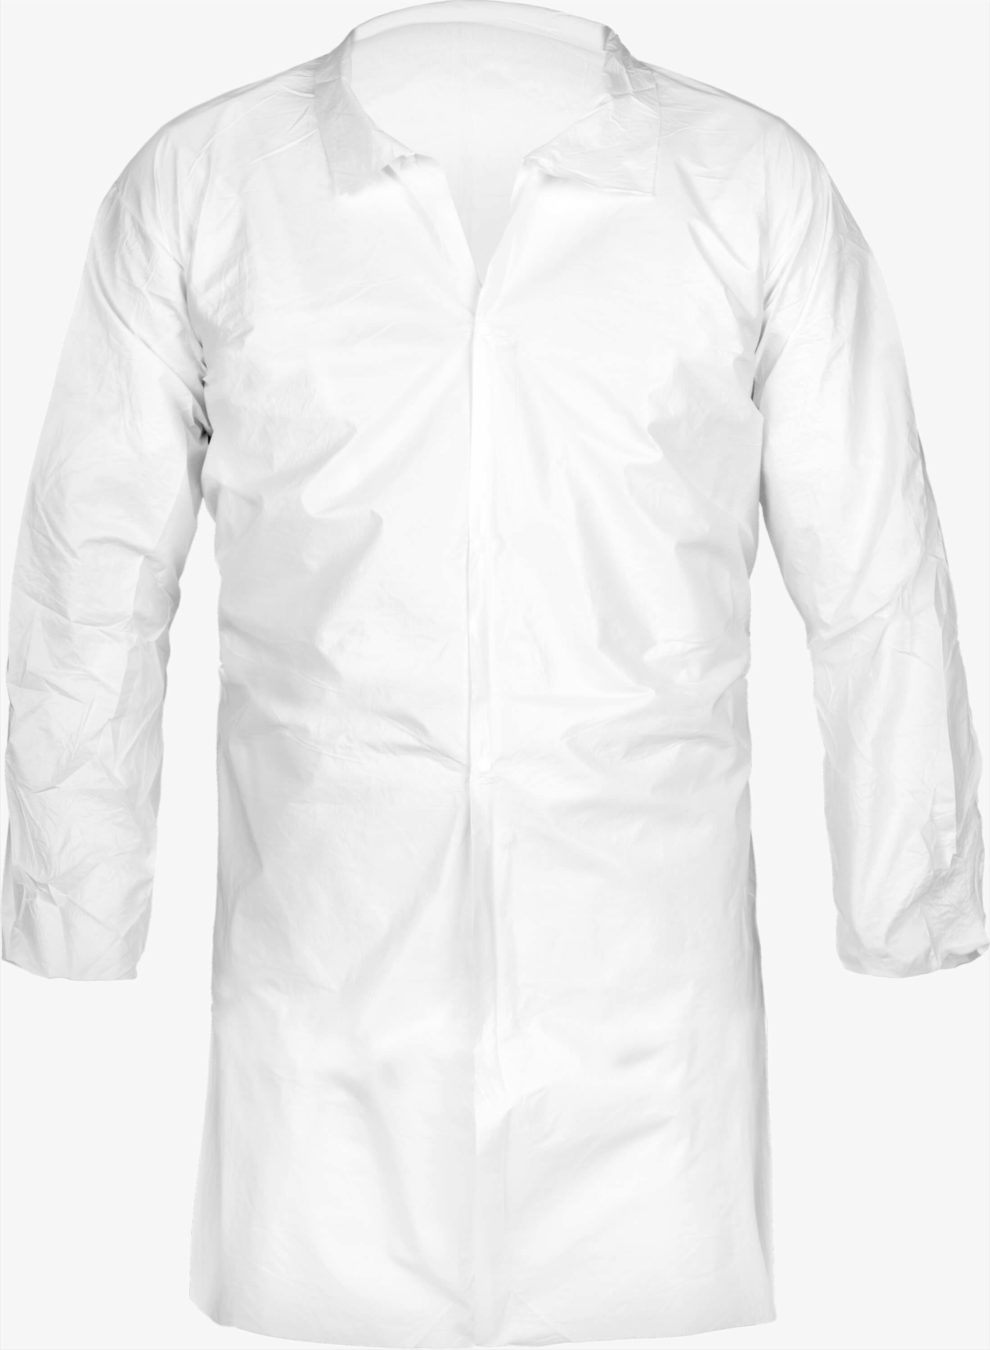 MicroMax® NS White Long Sleeve Lab Coat - Spill Control